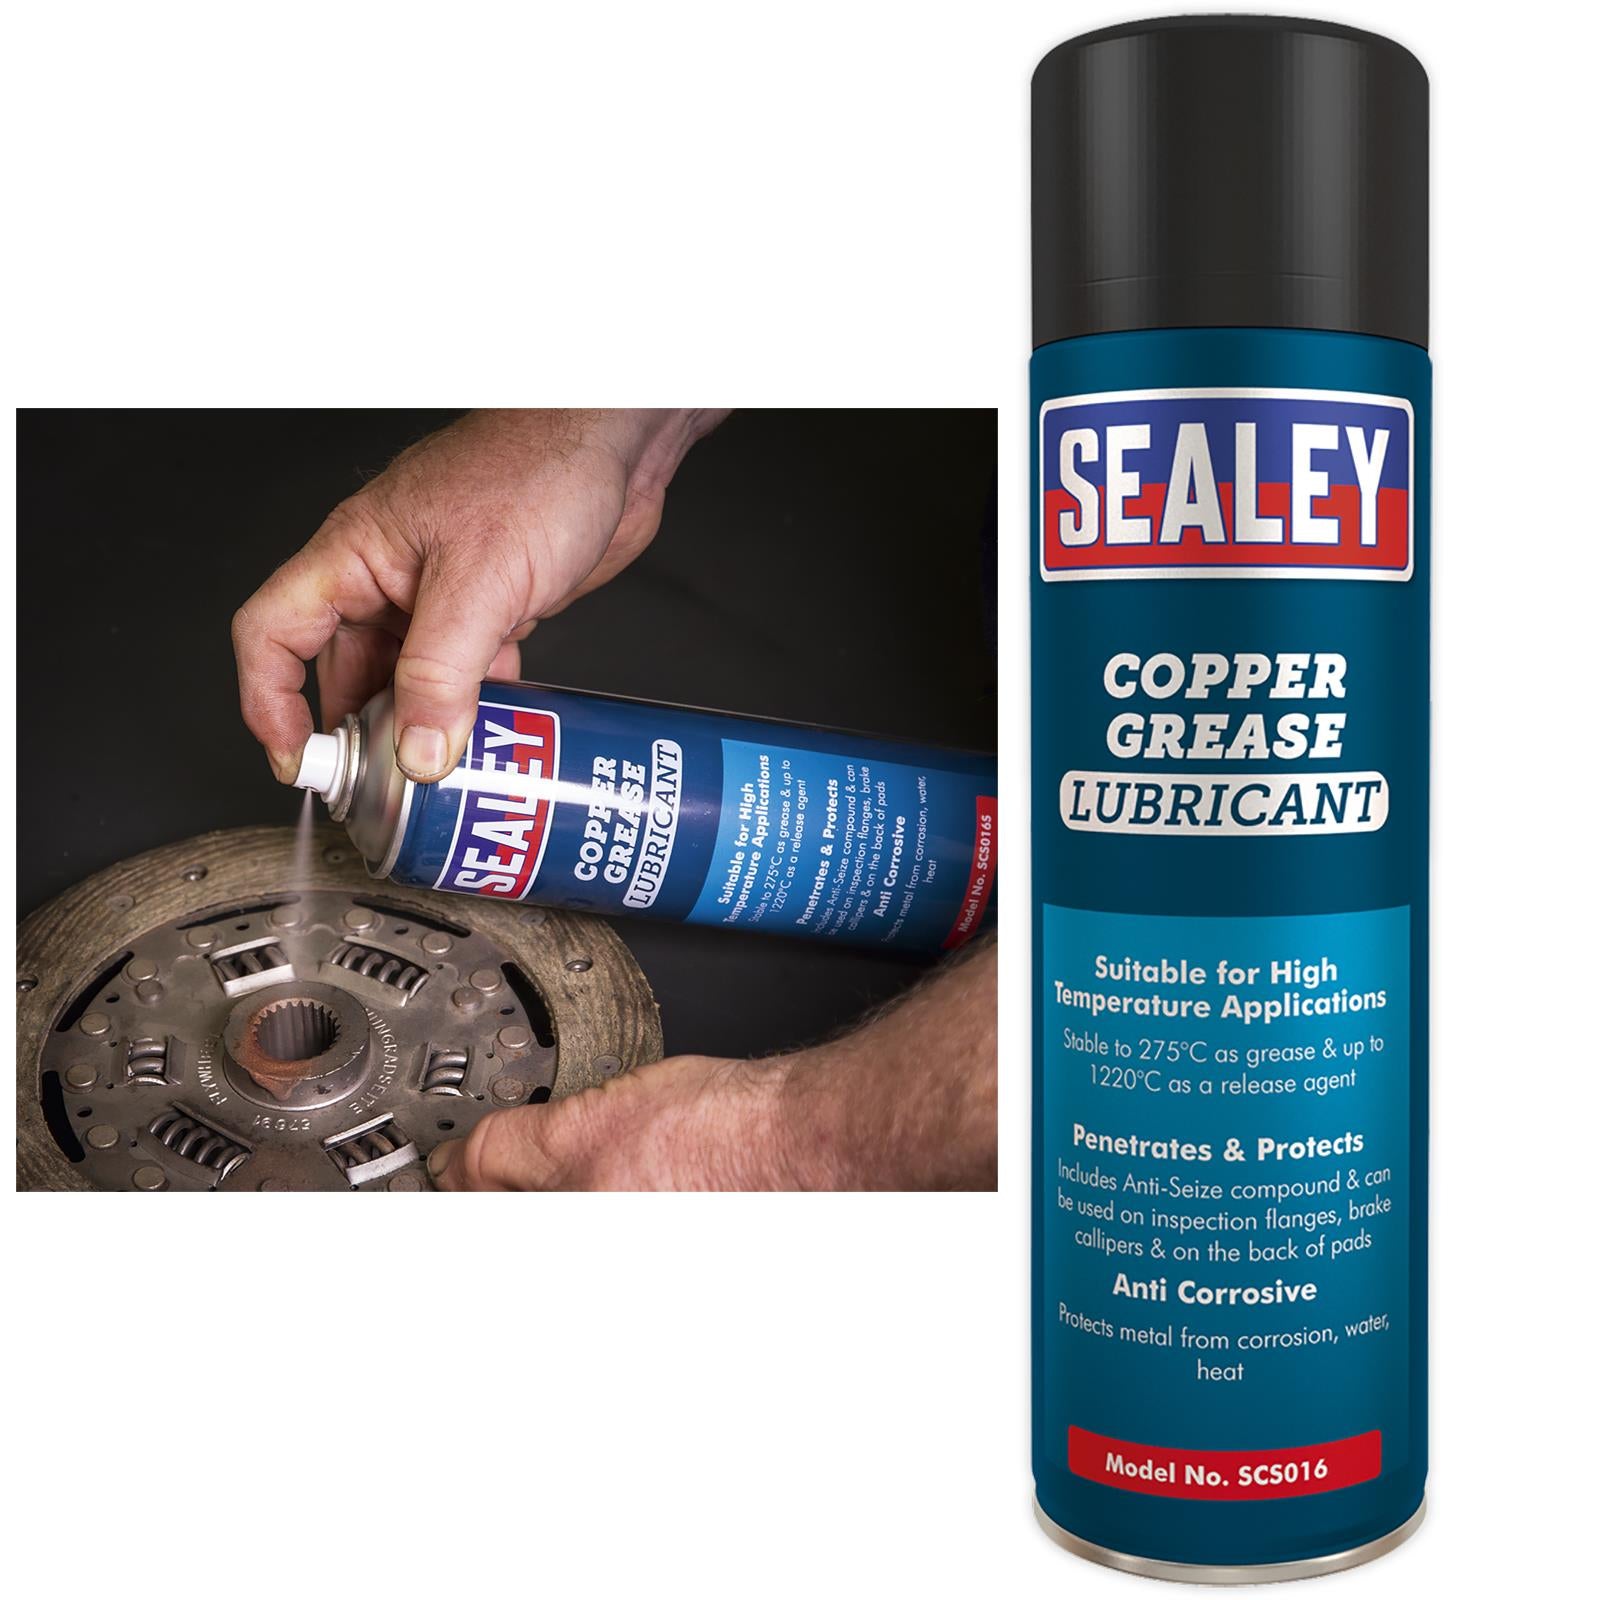 Sealey 500ml Copper Grease Spray Lubricant for High Temperature Applications